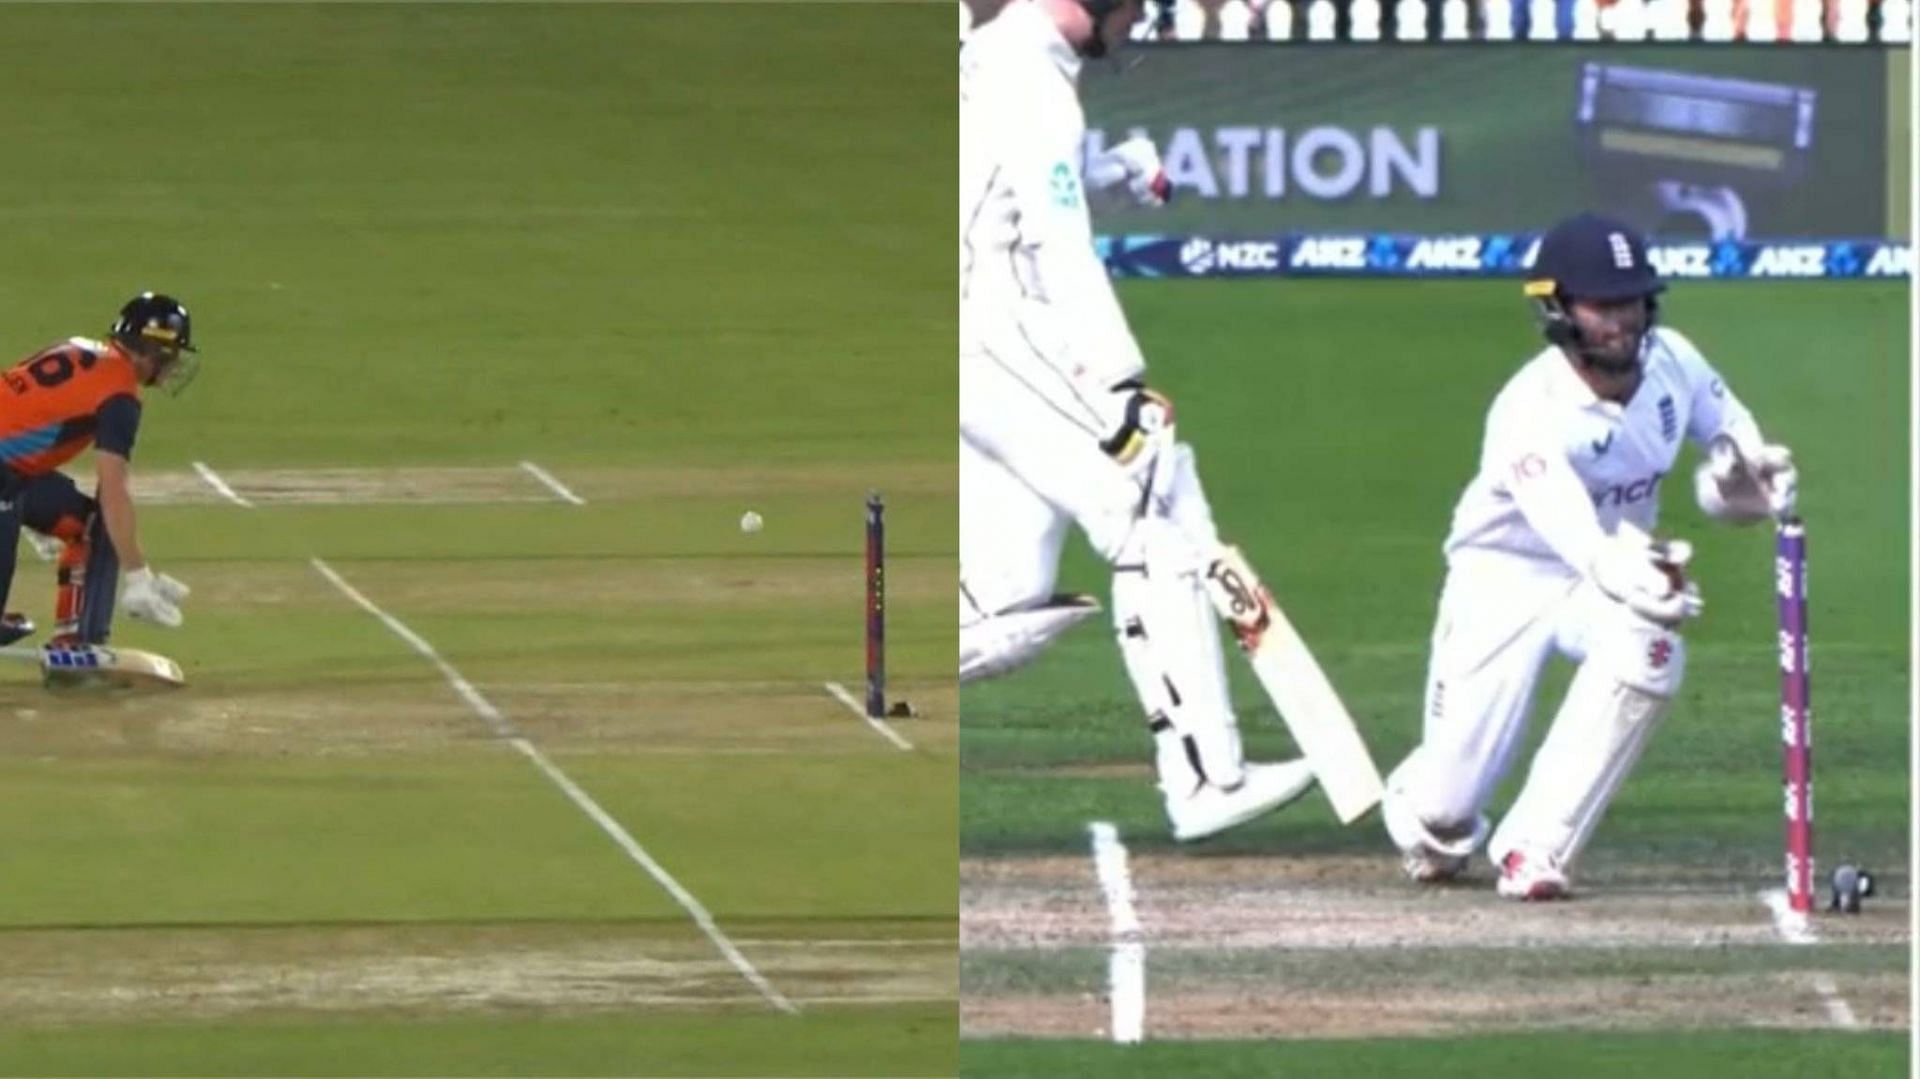 Some bizarre run-outs have happened in 2023 so far (Image: Twitter)